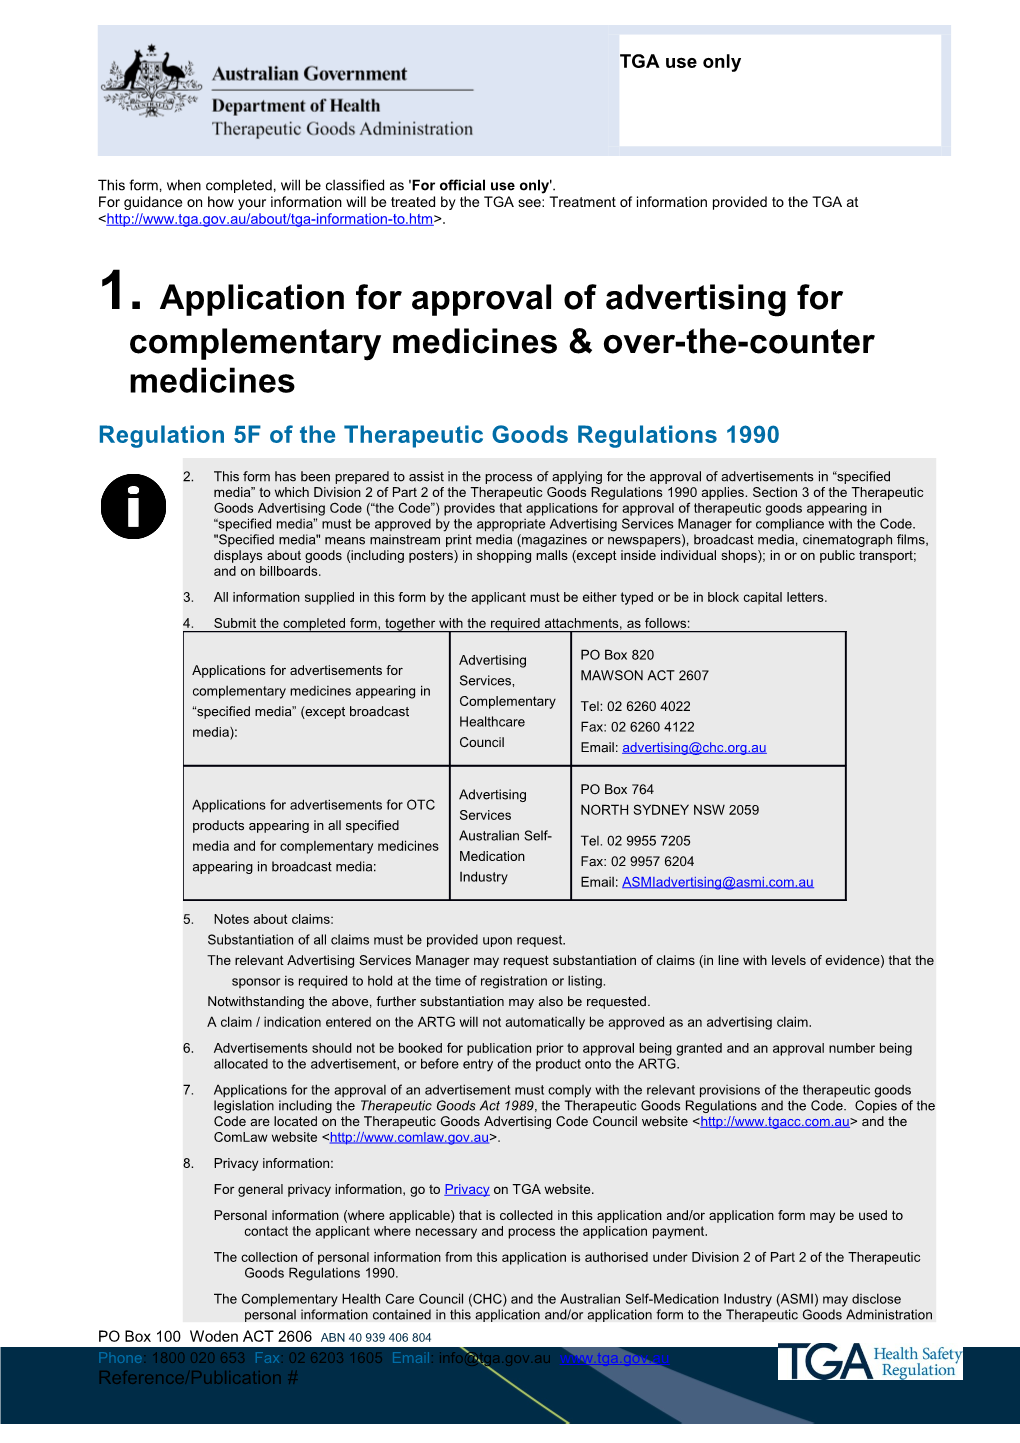 Application for Approval of Advertising for Complementary Medicines & Over-The-Counter Medicines